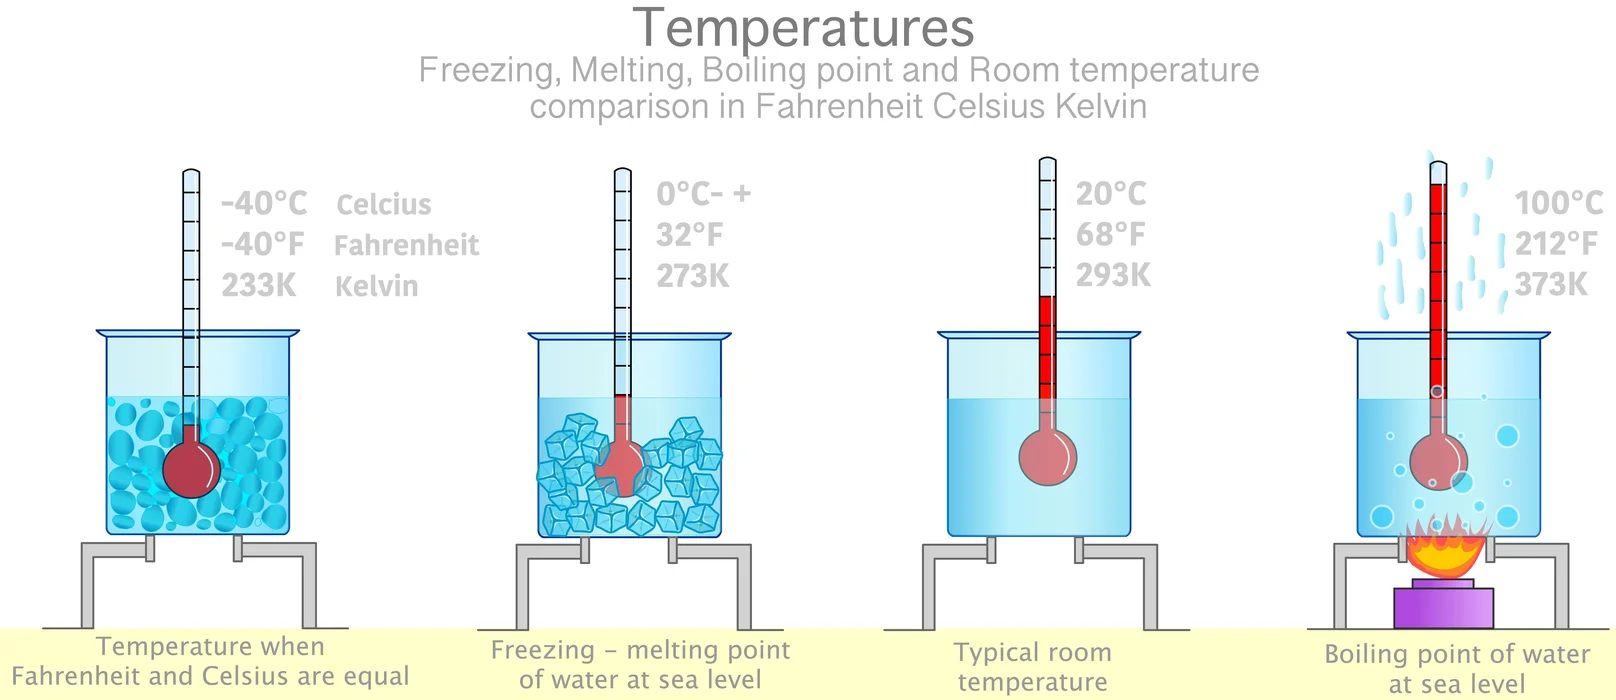 The ice (-4℃) is transformed into ice at 0℃. Then the ice starts to melt into water and on further heating, the water transforms into a vapour state at 100℃.